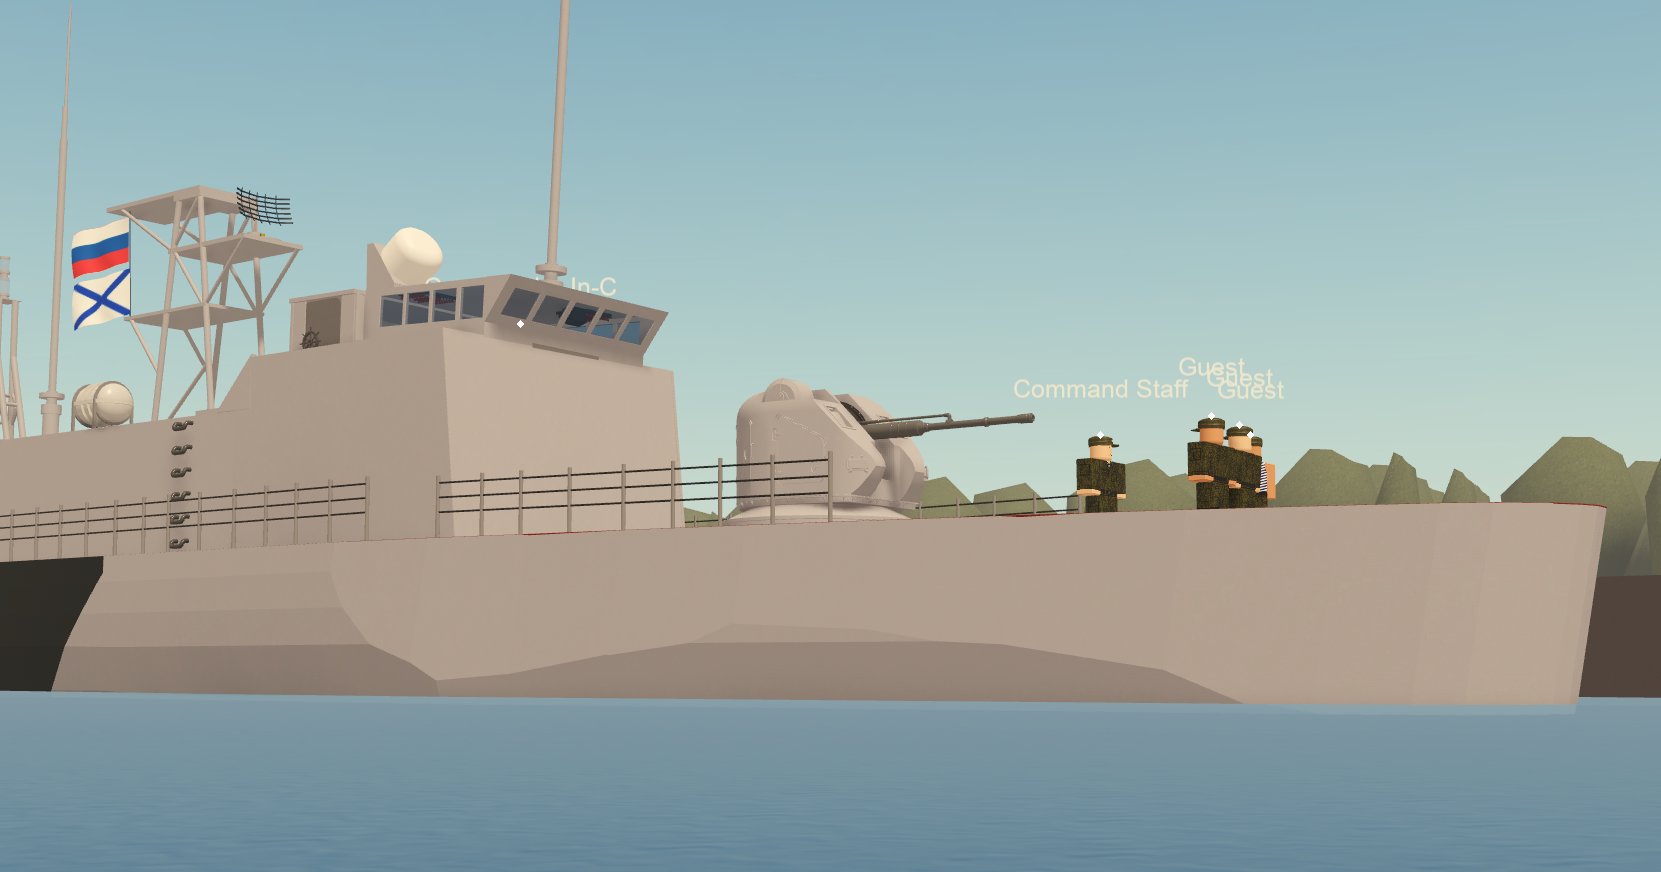 Channel One Russia Roblox On Twitter The Russian Navy Has Been Seen Recently Drilling And Recruiting The Navy Has Seen A Massive Boost In Development And Activity Since Its Recommissioning Https T Co Hr782bgekt - roblox moscow